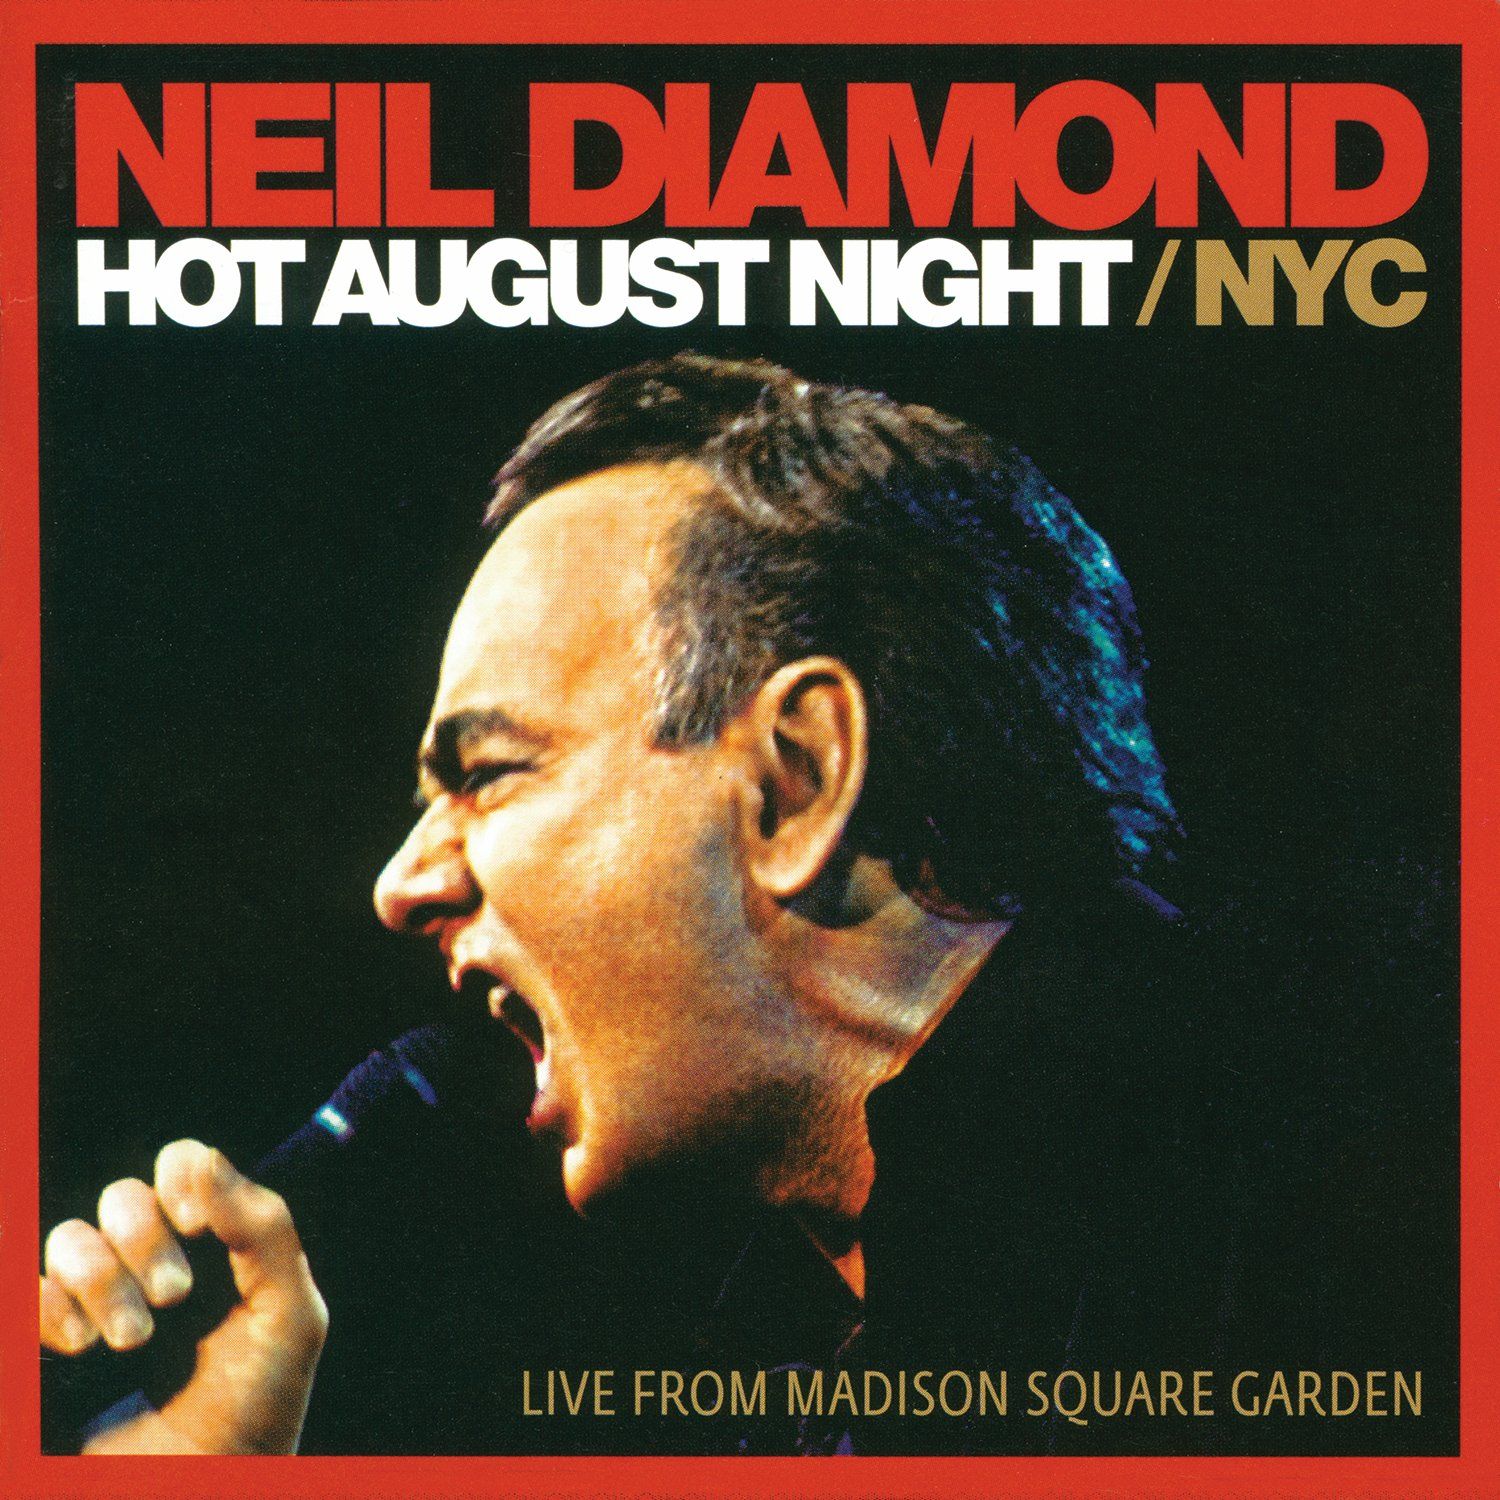 Capitol/UME to release ‘Neil Diamond With The London Symphony Orchestra, Classic Diamonds’ on November 20